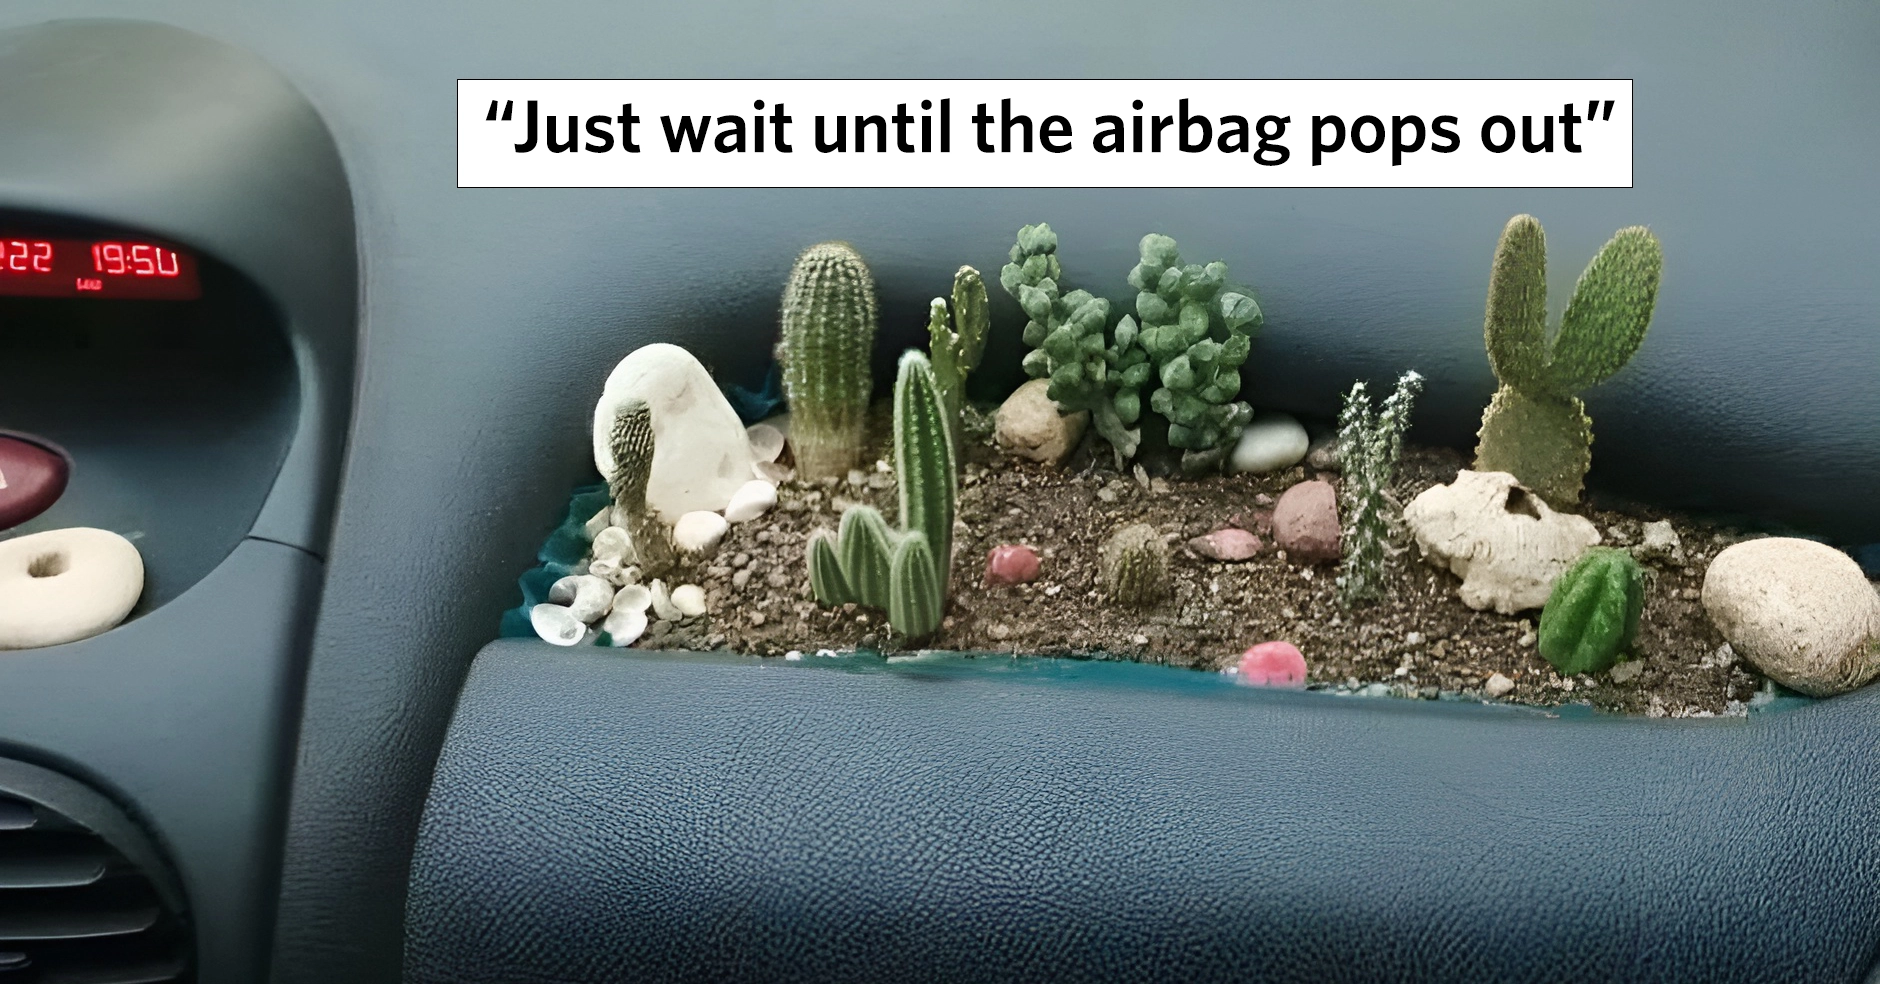 A dashboard of a car is converted into a mini desert garden with various small cacti and succulents planted in the space where an airbag typically would be. The caption above reads, "Just wait until the airbag pops out.